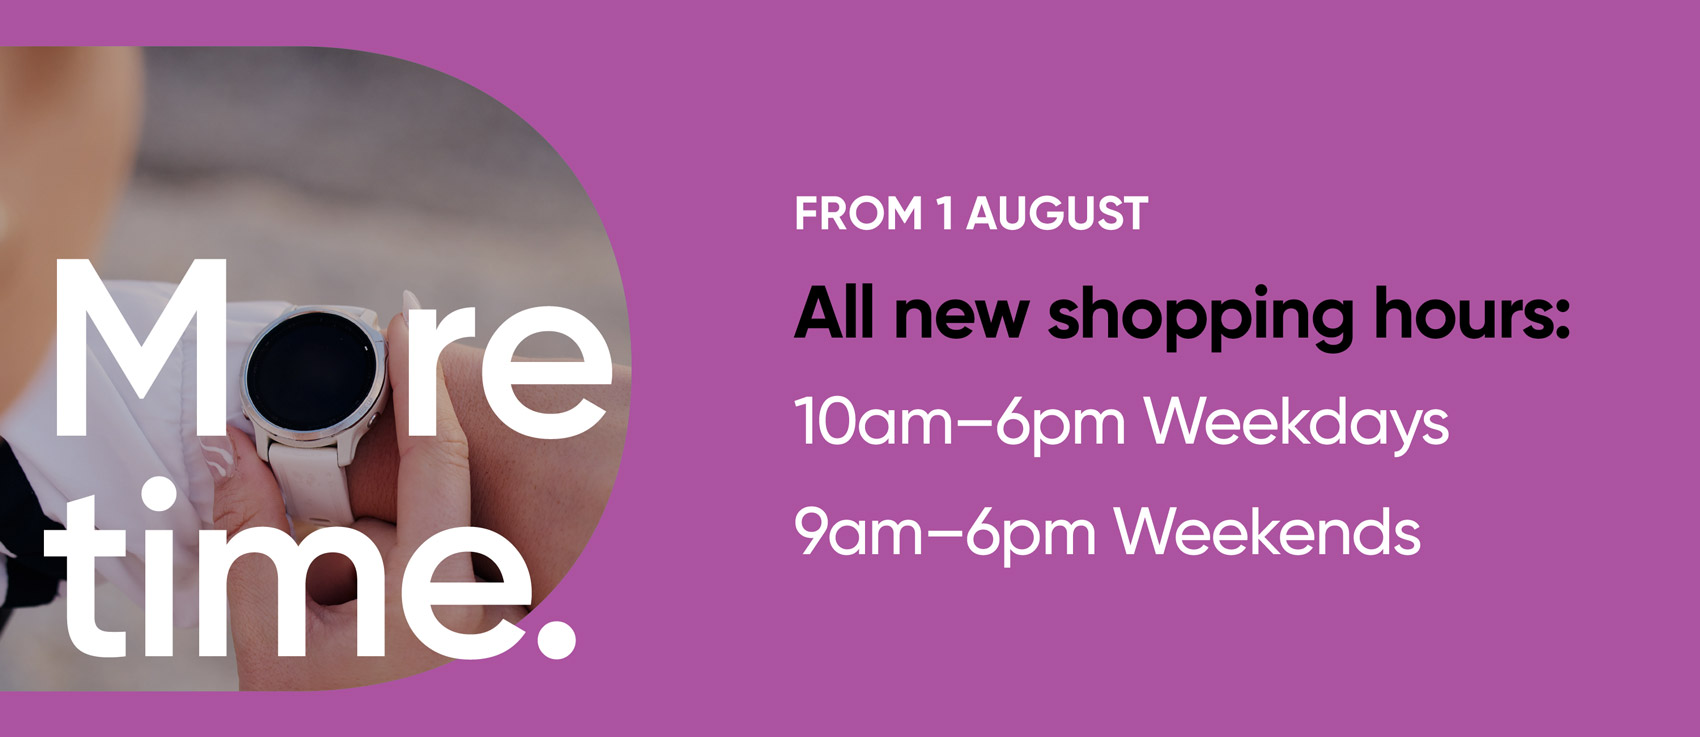 More time. From 1 August, all new shopping hours.